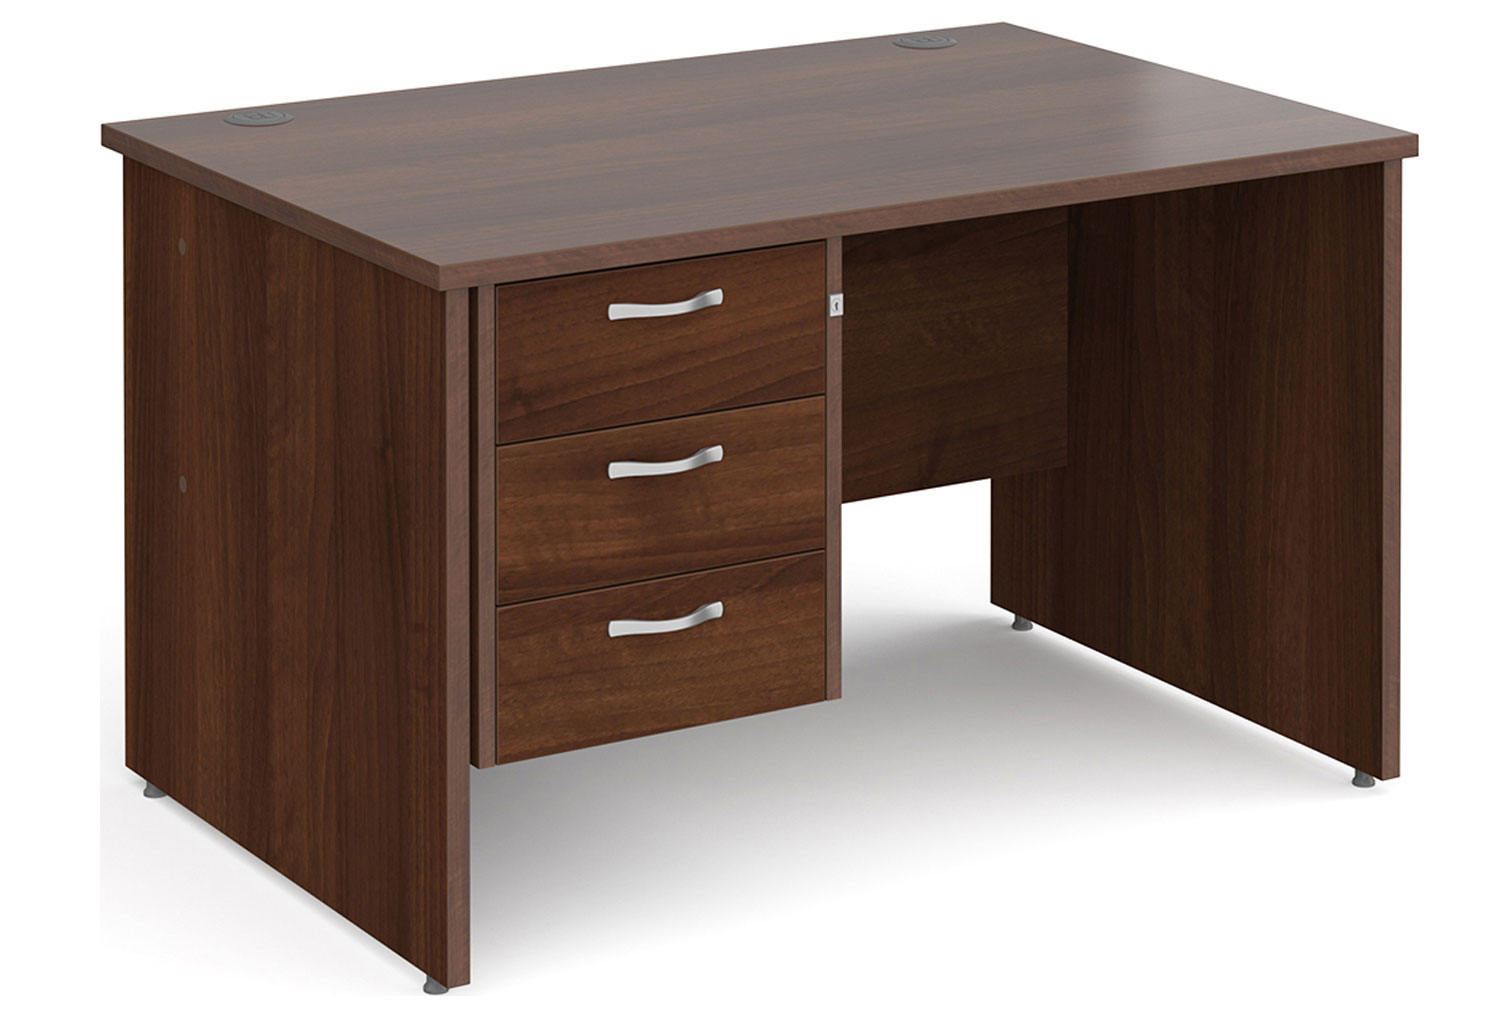 All Walnut Panel End Clerical Office Desk 3 Drawers, 120wx80dx73h (cm), Express Delivery